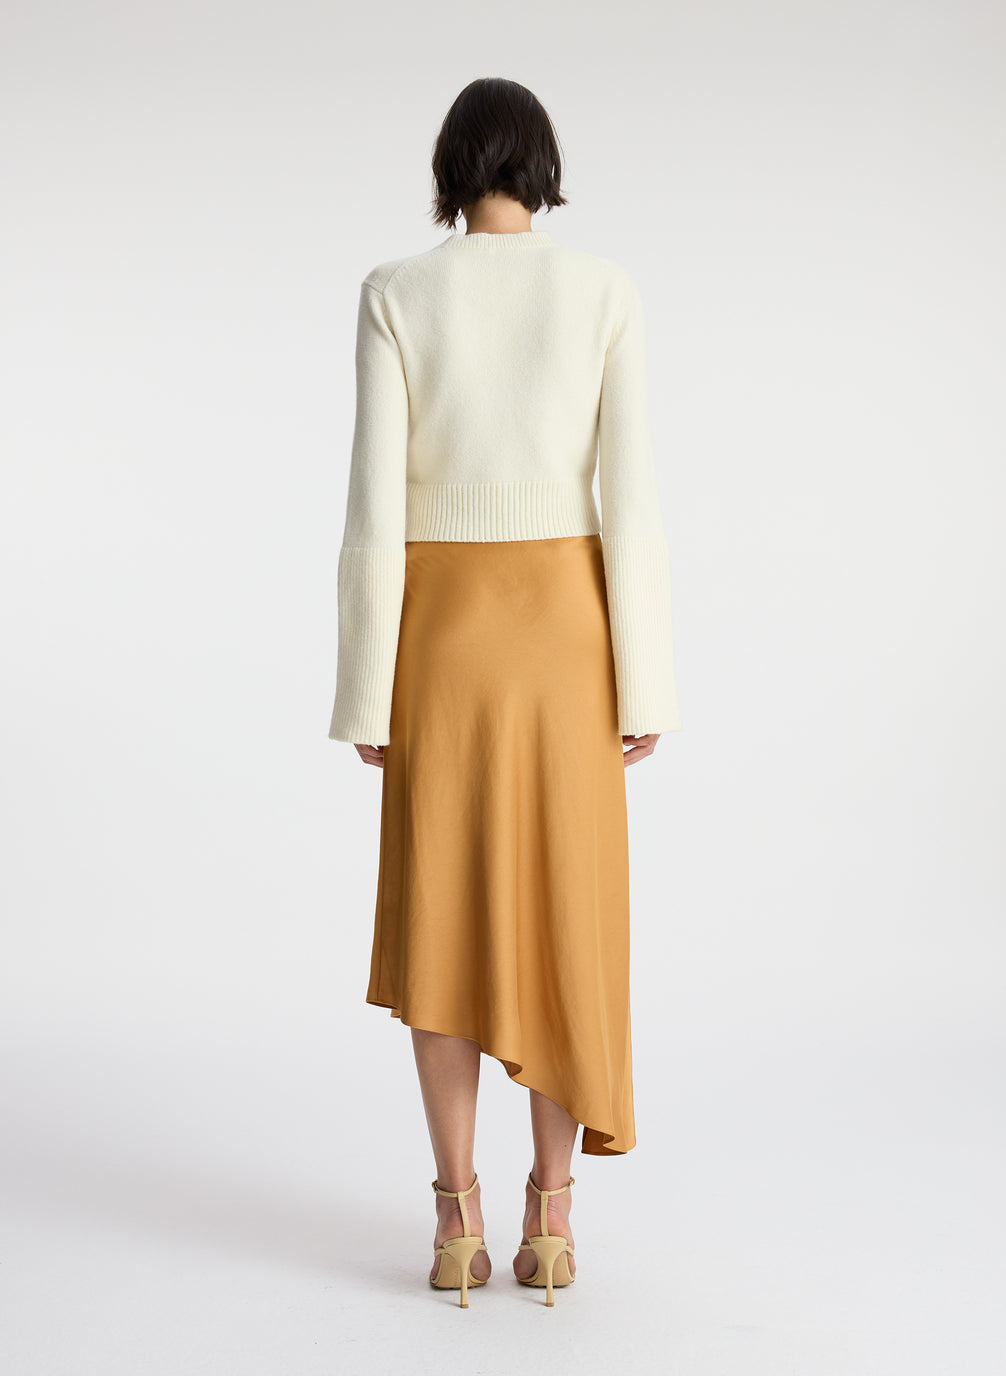 back view of woman wearing white sweater and brown satin asymmetric midi skirt